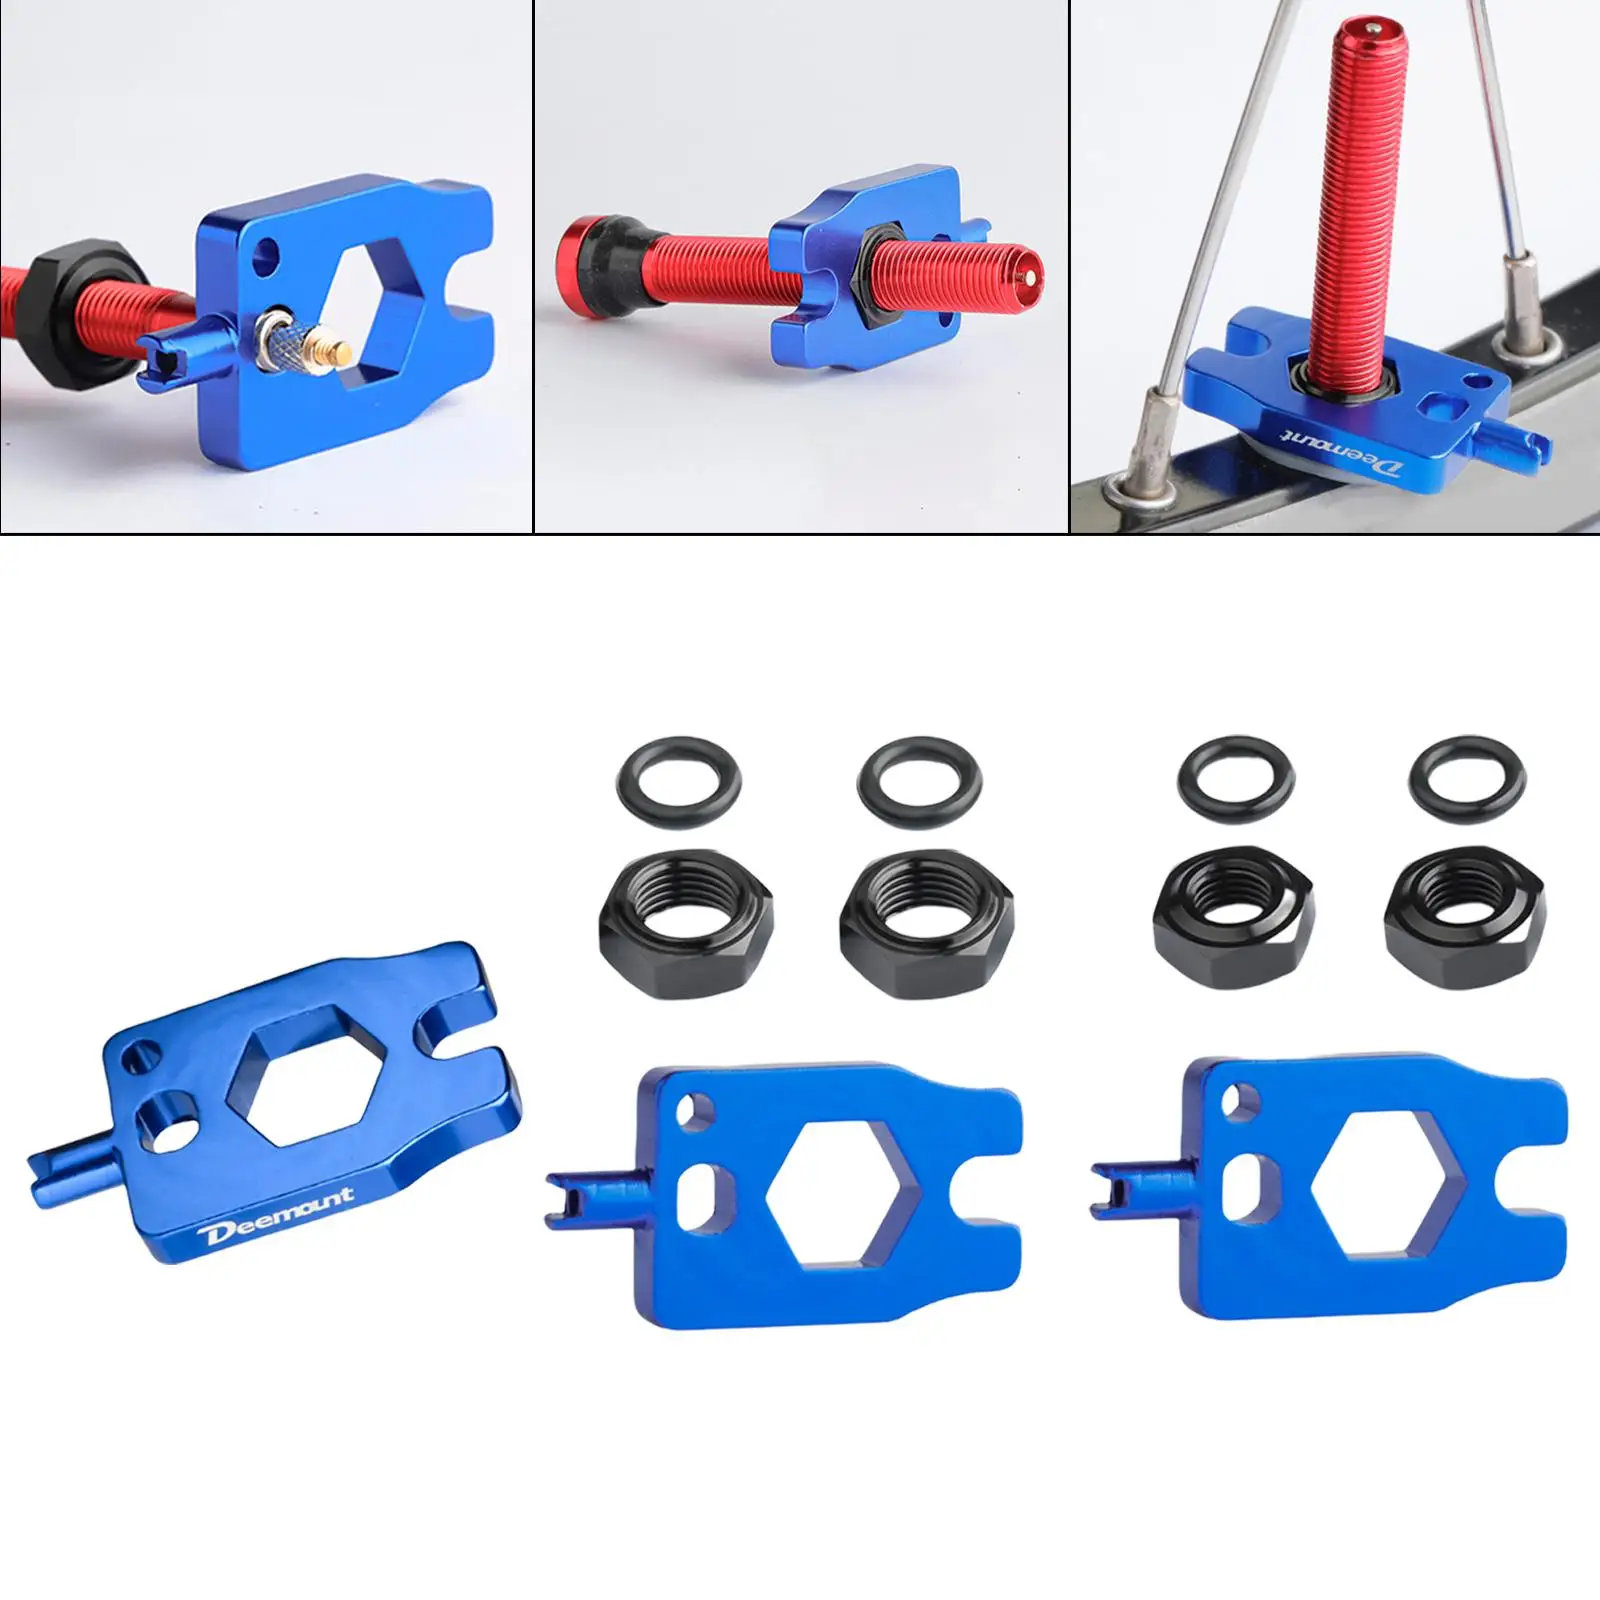 Repair Bicycle Valve Wrench Multifunction Mountain Road Schrader/Presta Valve Core Installation Tool Removal Accessories